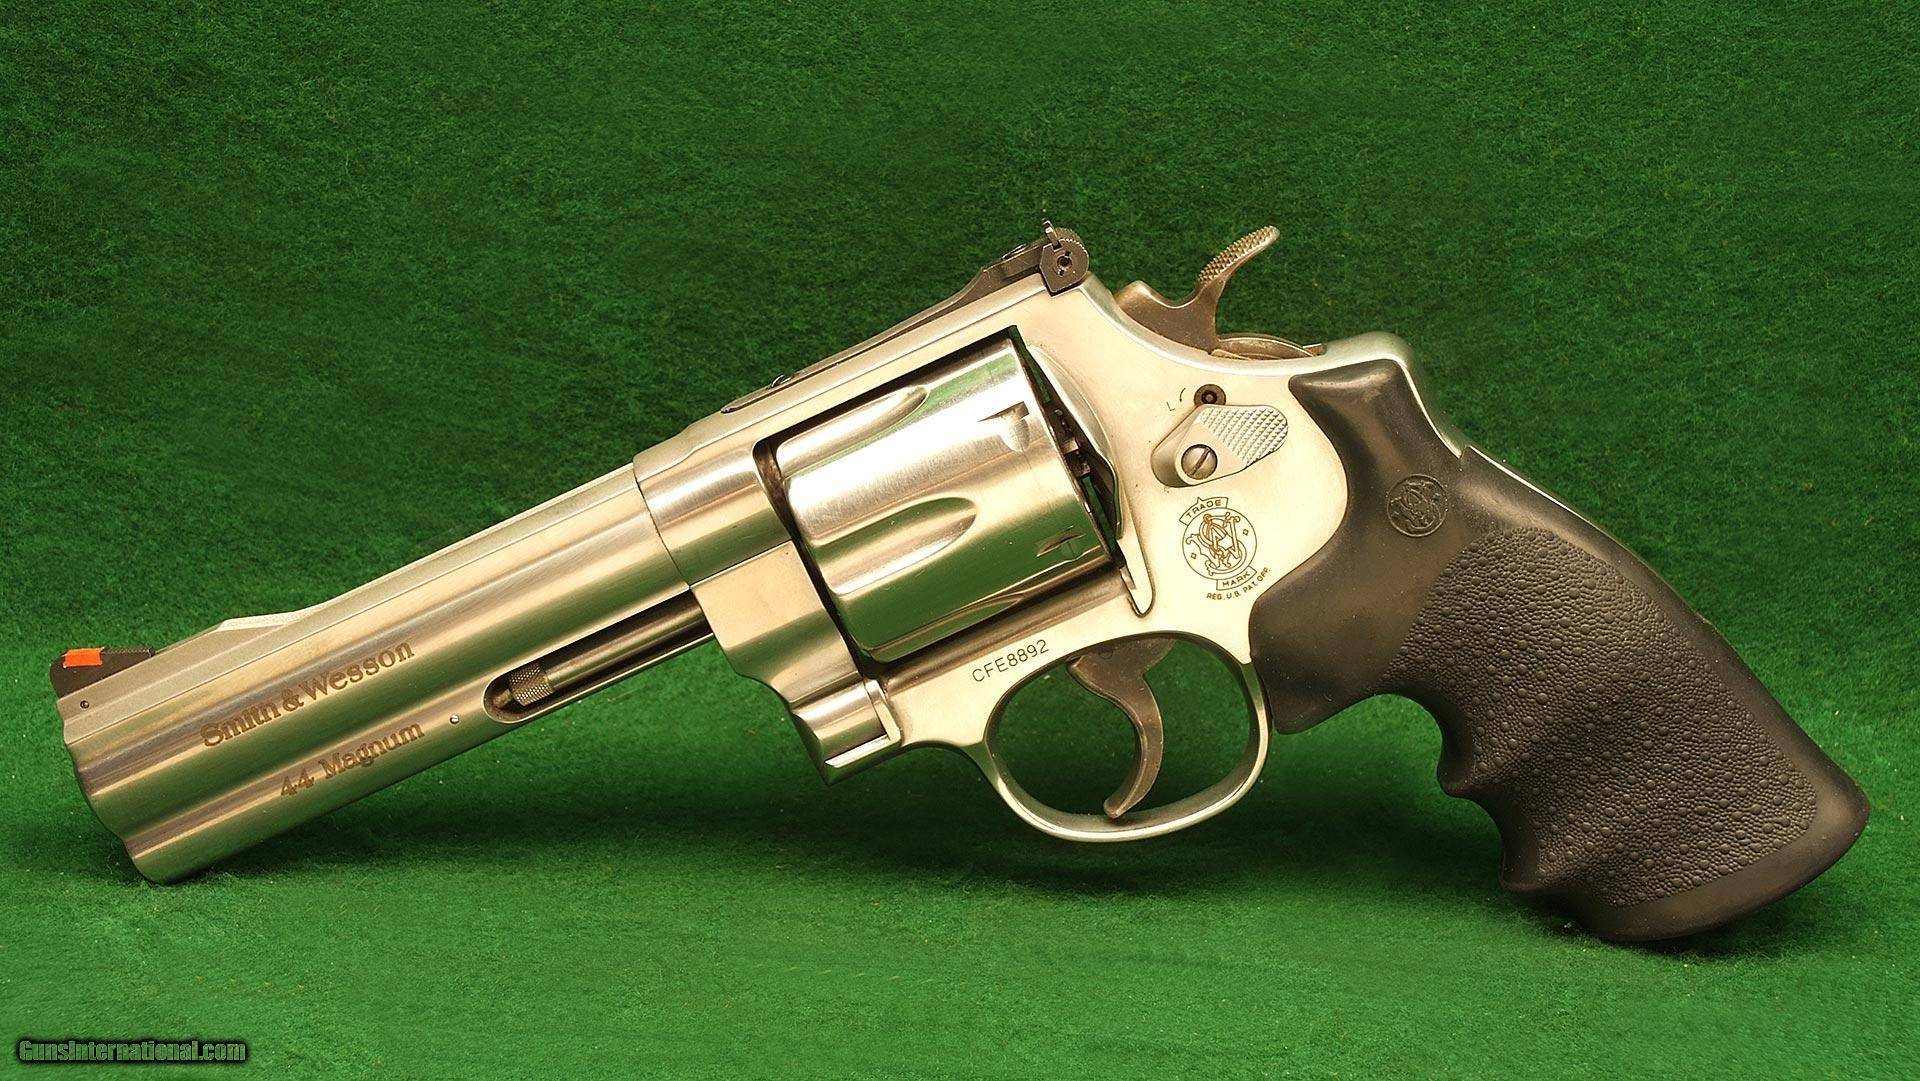 Smith & wesson model 625 - smith & wesson model 625 - qwe.wiki